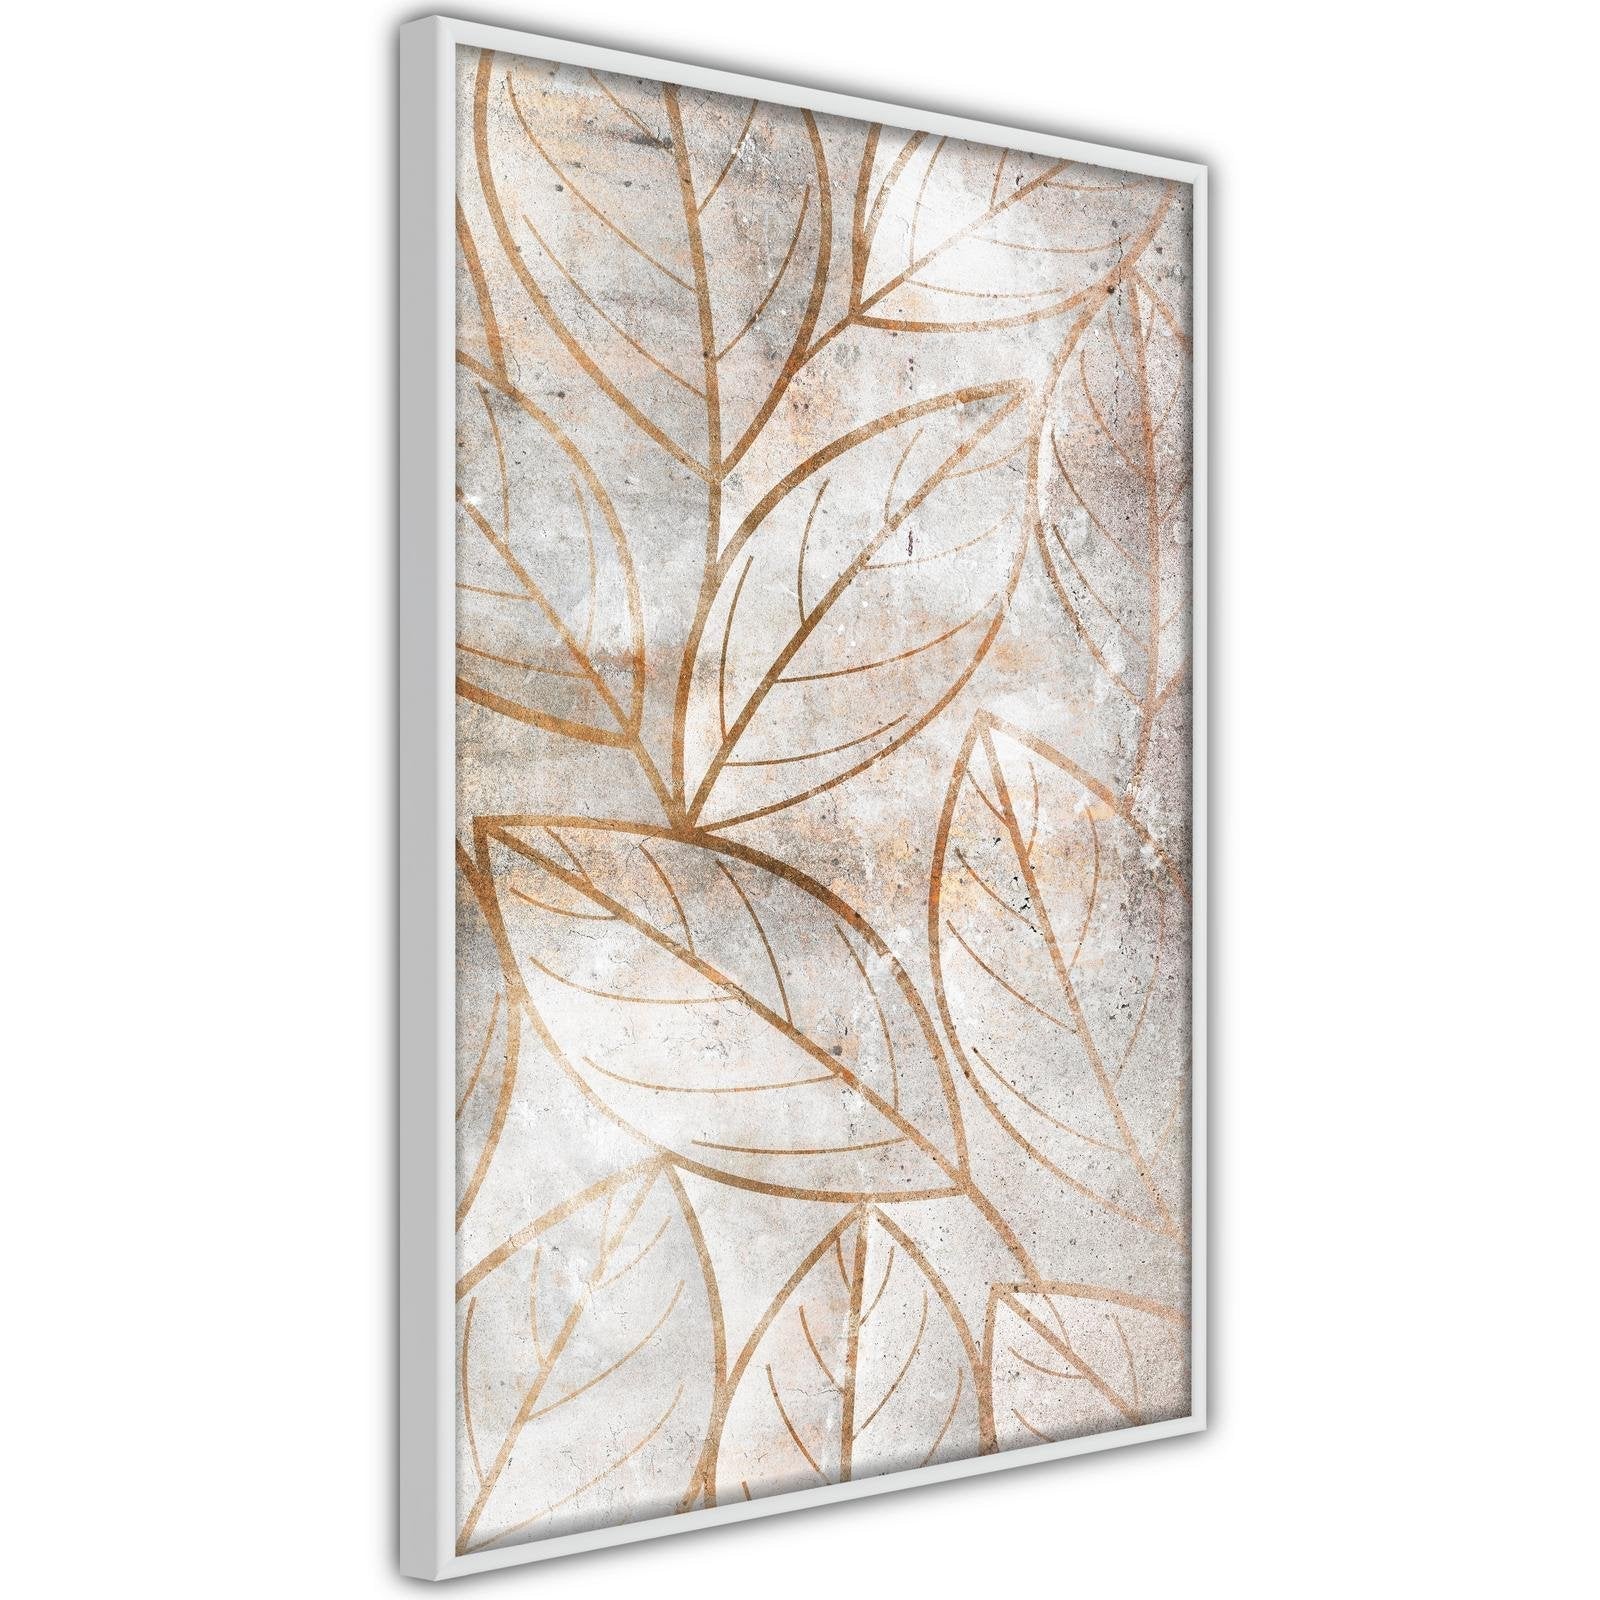 Inramad Poster / Tavla - Copper Leaves-Poster Inramad-Artgeist-peaceofhome.se